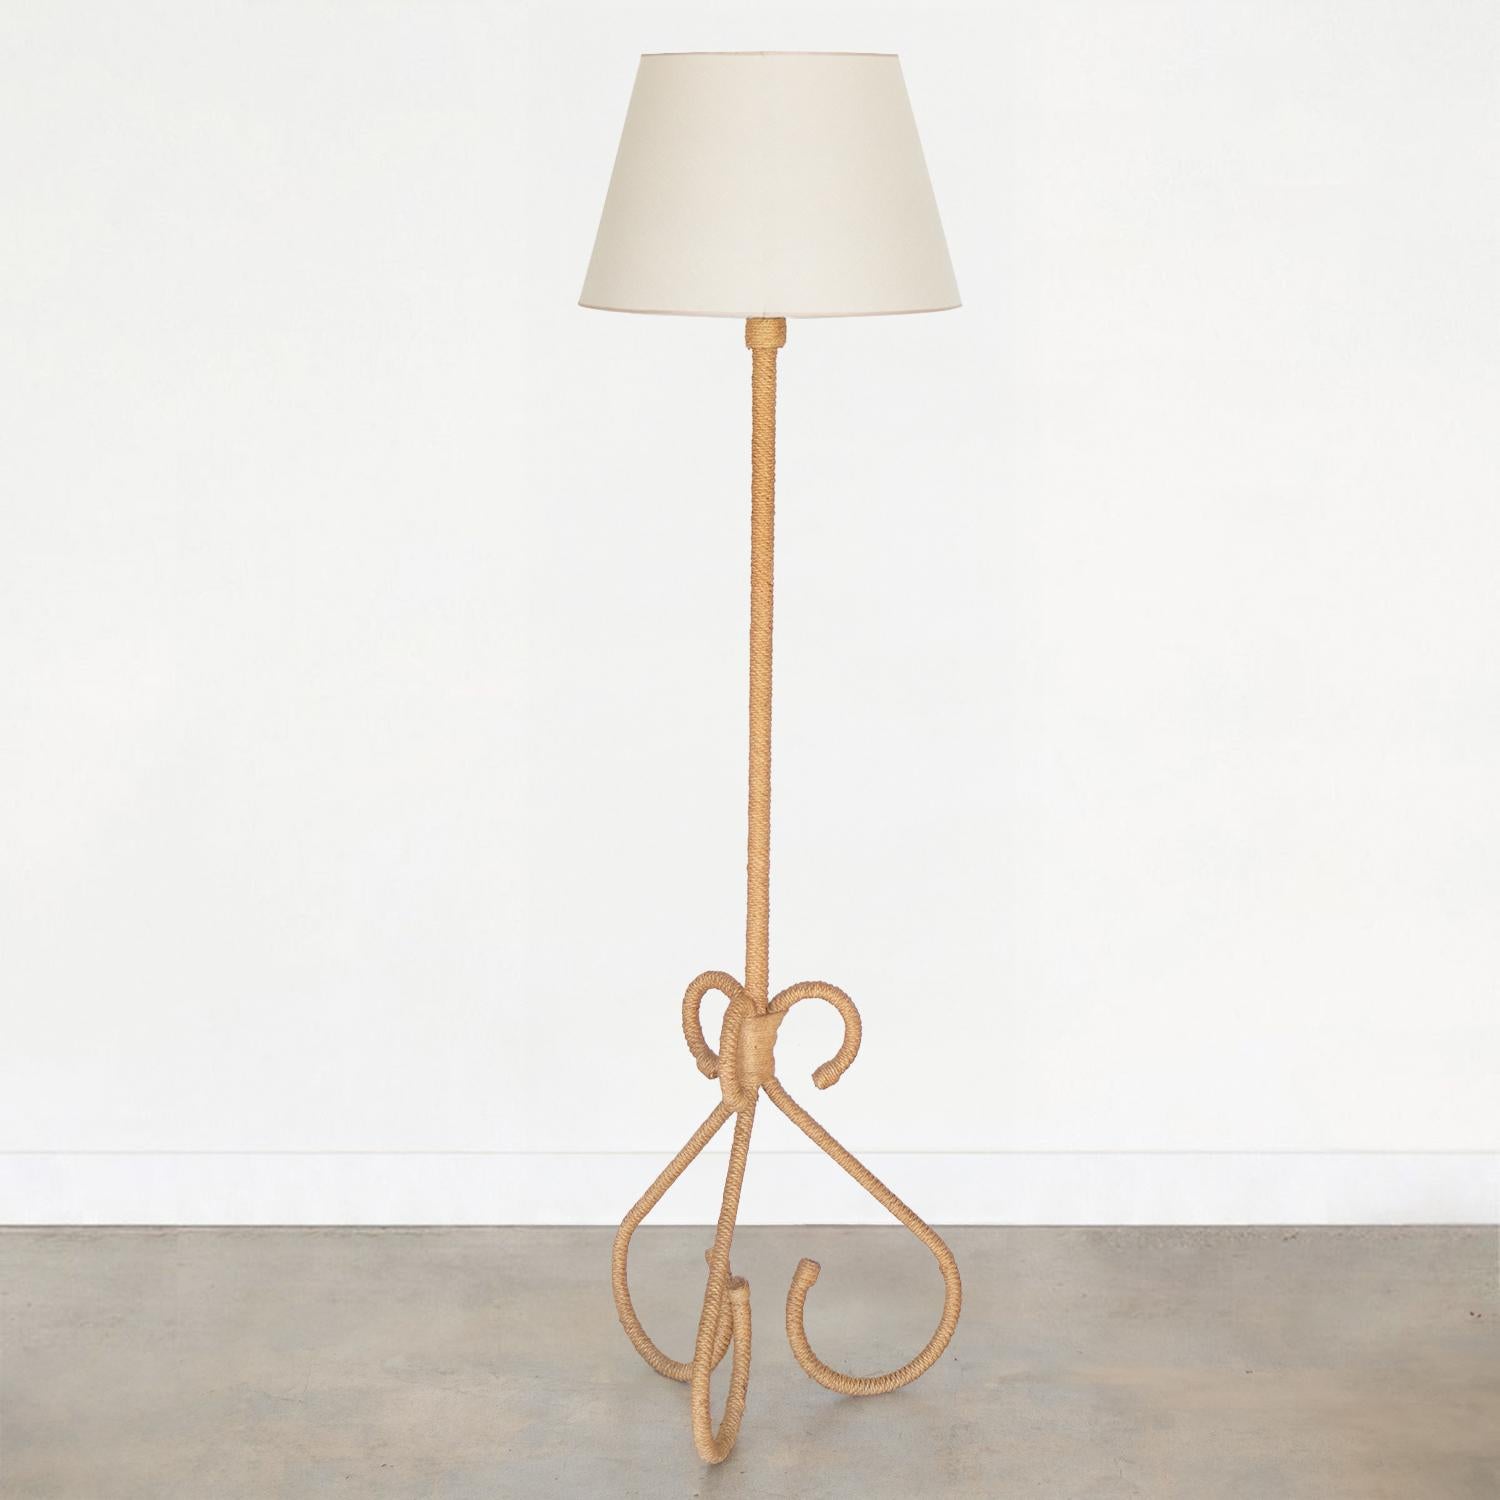 Incredible rope floor lamp by French designers Adrien Audoux and Freda Minet. Beautiful looped tripod base and stem in wrapped rope. New tapered linen shade with tan trim detail and newly re-wired. Original rope shows great patina and age. Takes one